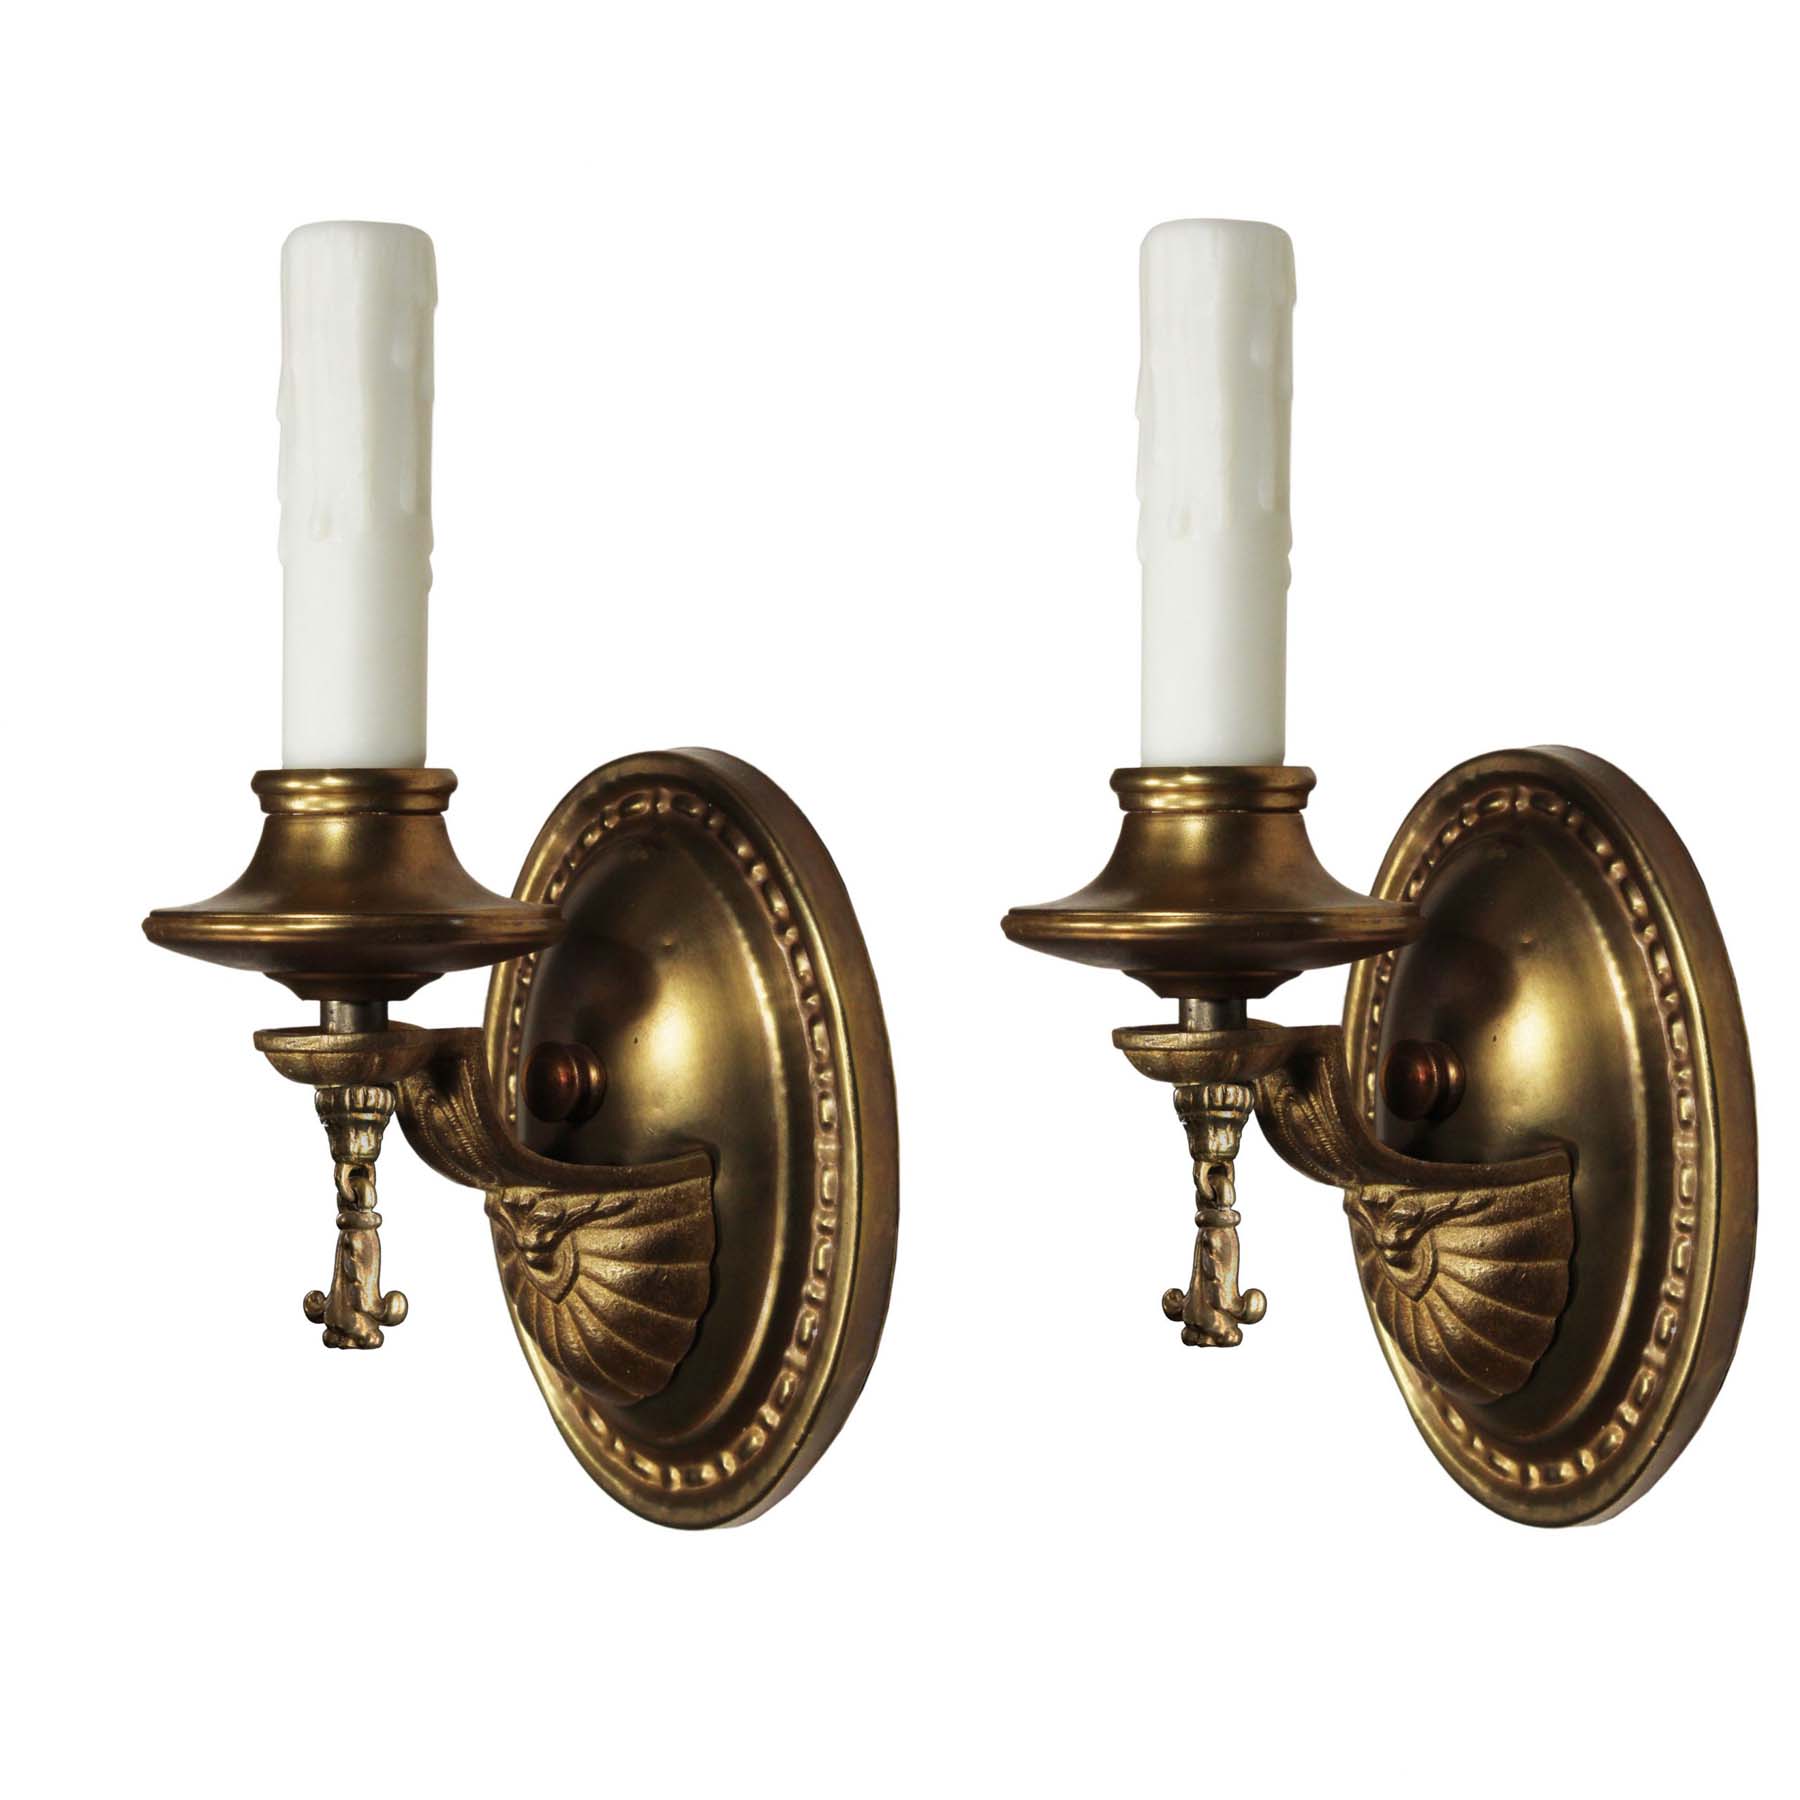 SOLD Pair of Antique Brass Neoclassical Sconces, c. 1920-0